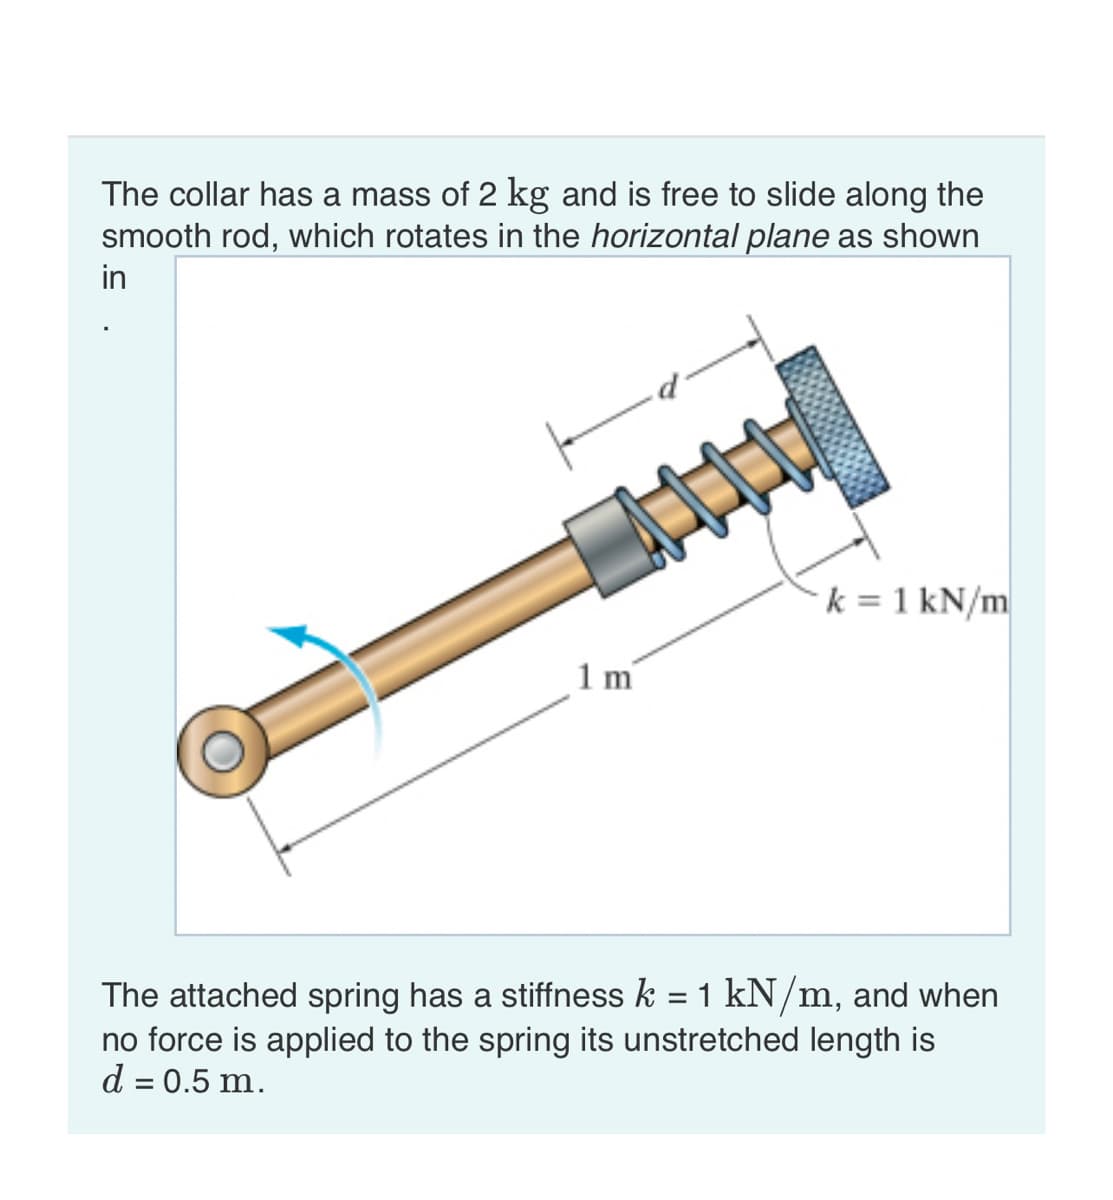 The collar has a mass of 2 kg and is free to slide along the
smooth rod, which rotates in the horizontal plane as shown
in
1 m
k = 1 kN/m
The attached spring has a stiffness k = 1 kN/m, and when
no force is applied to the spring its unstretched length is
d = 0.5 m.